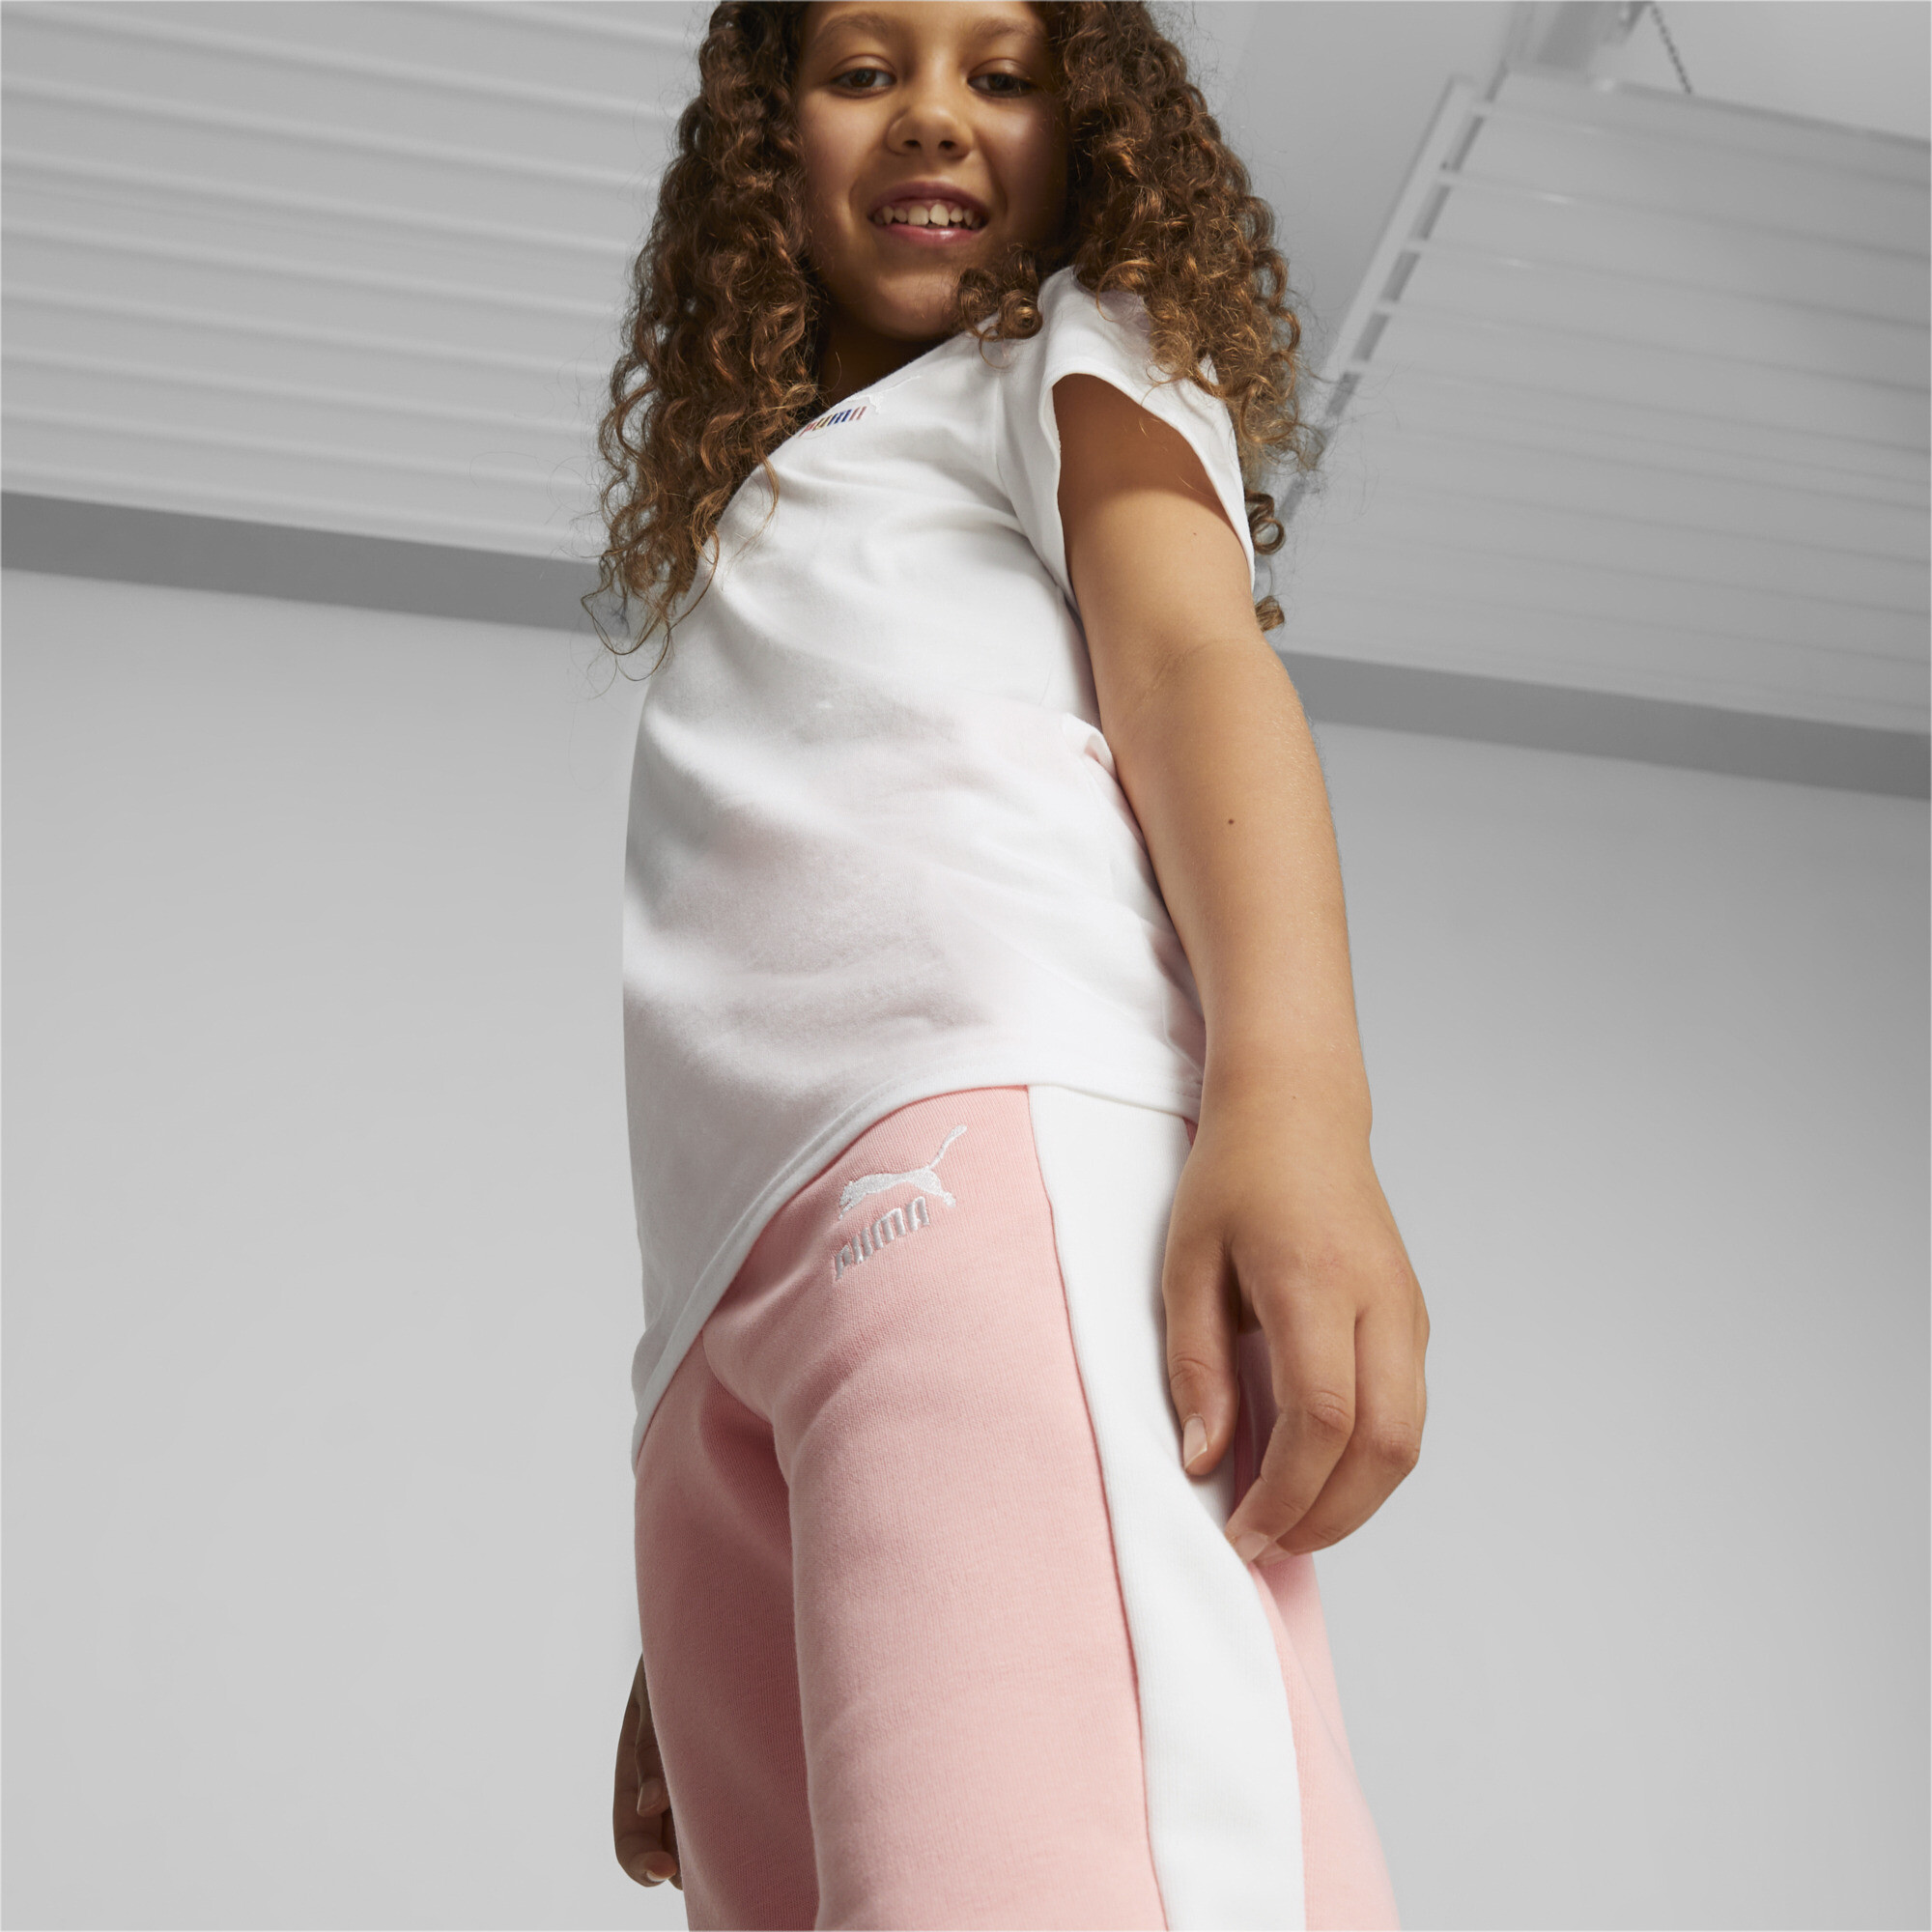 PUMA Classics T7 Track Pants In Pink, Size 3-4 Youth